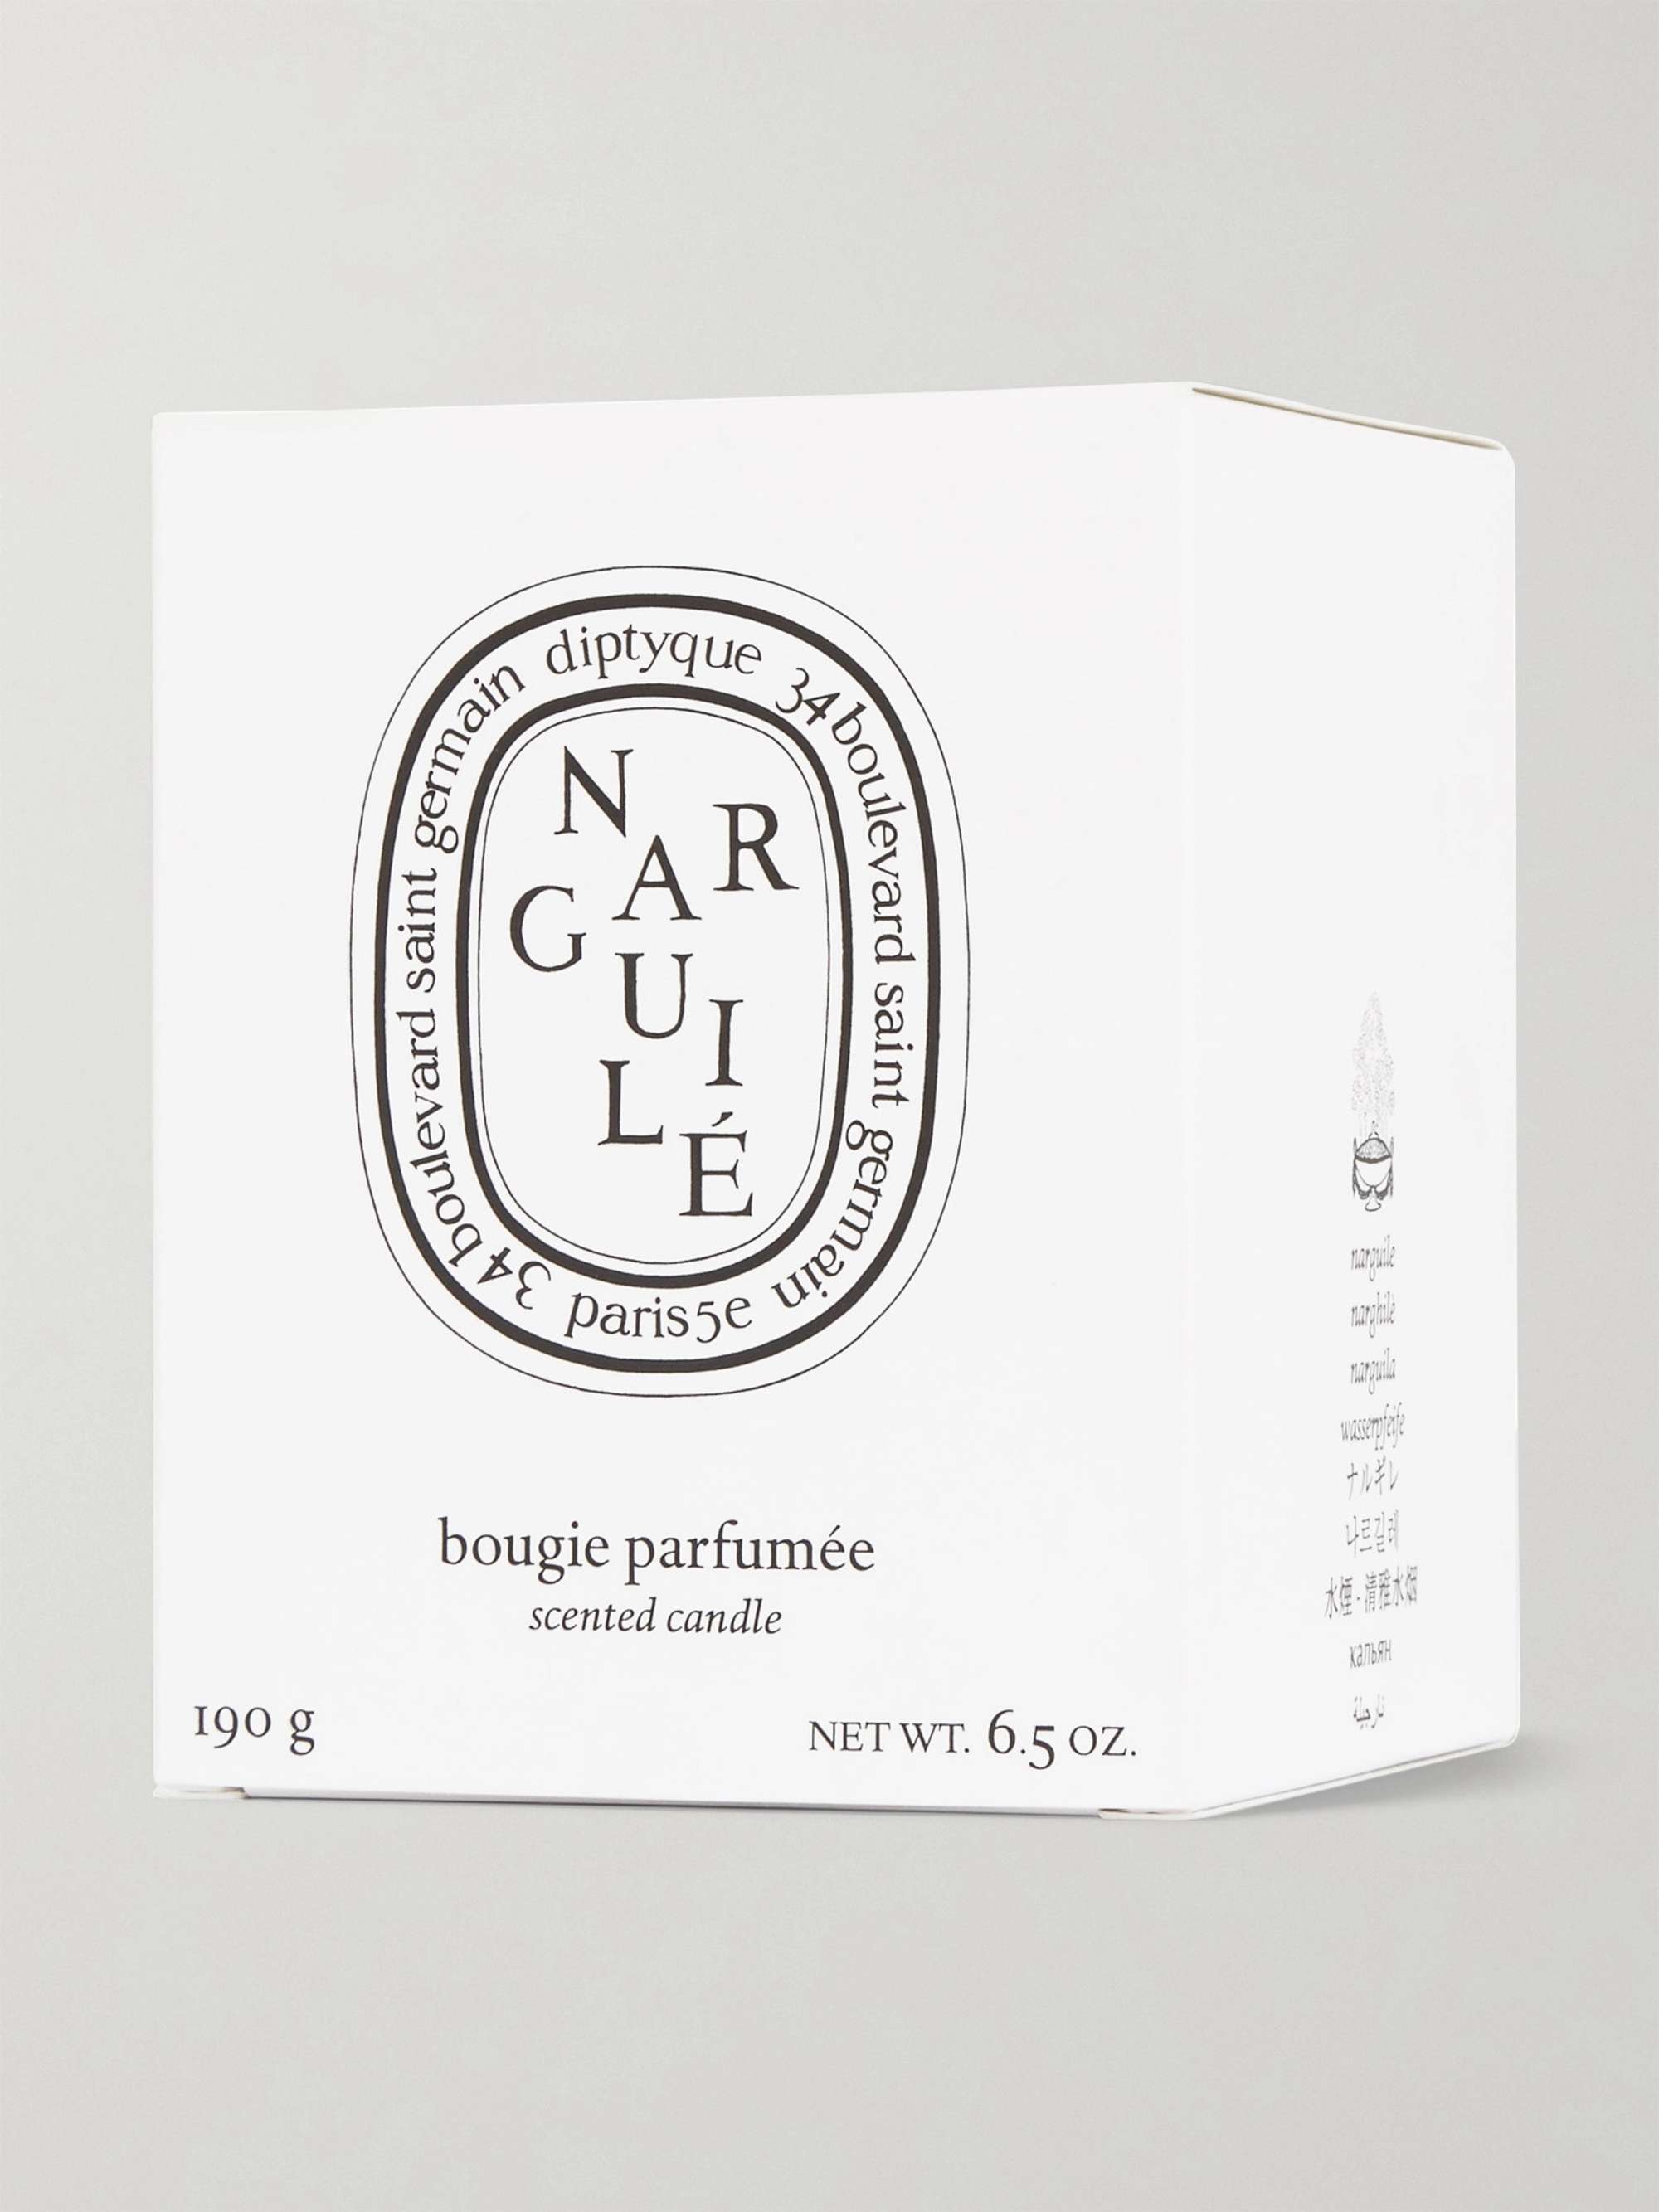 DIPTYQUE Narguilé Scented Candle, 190g